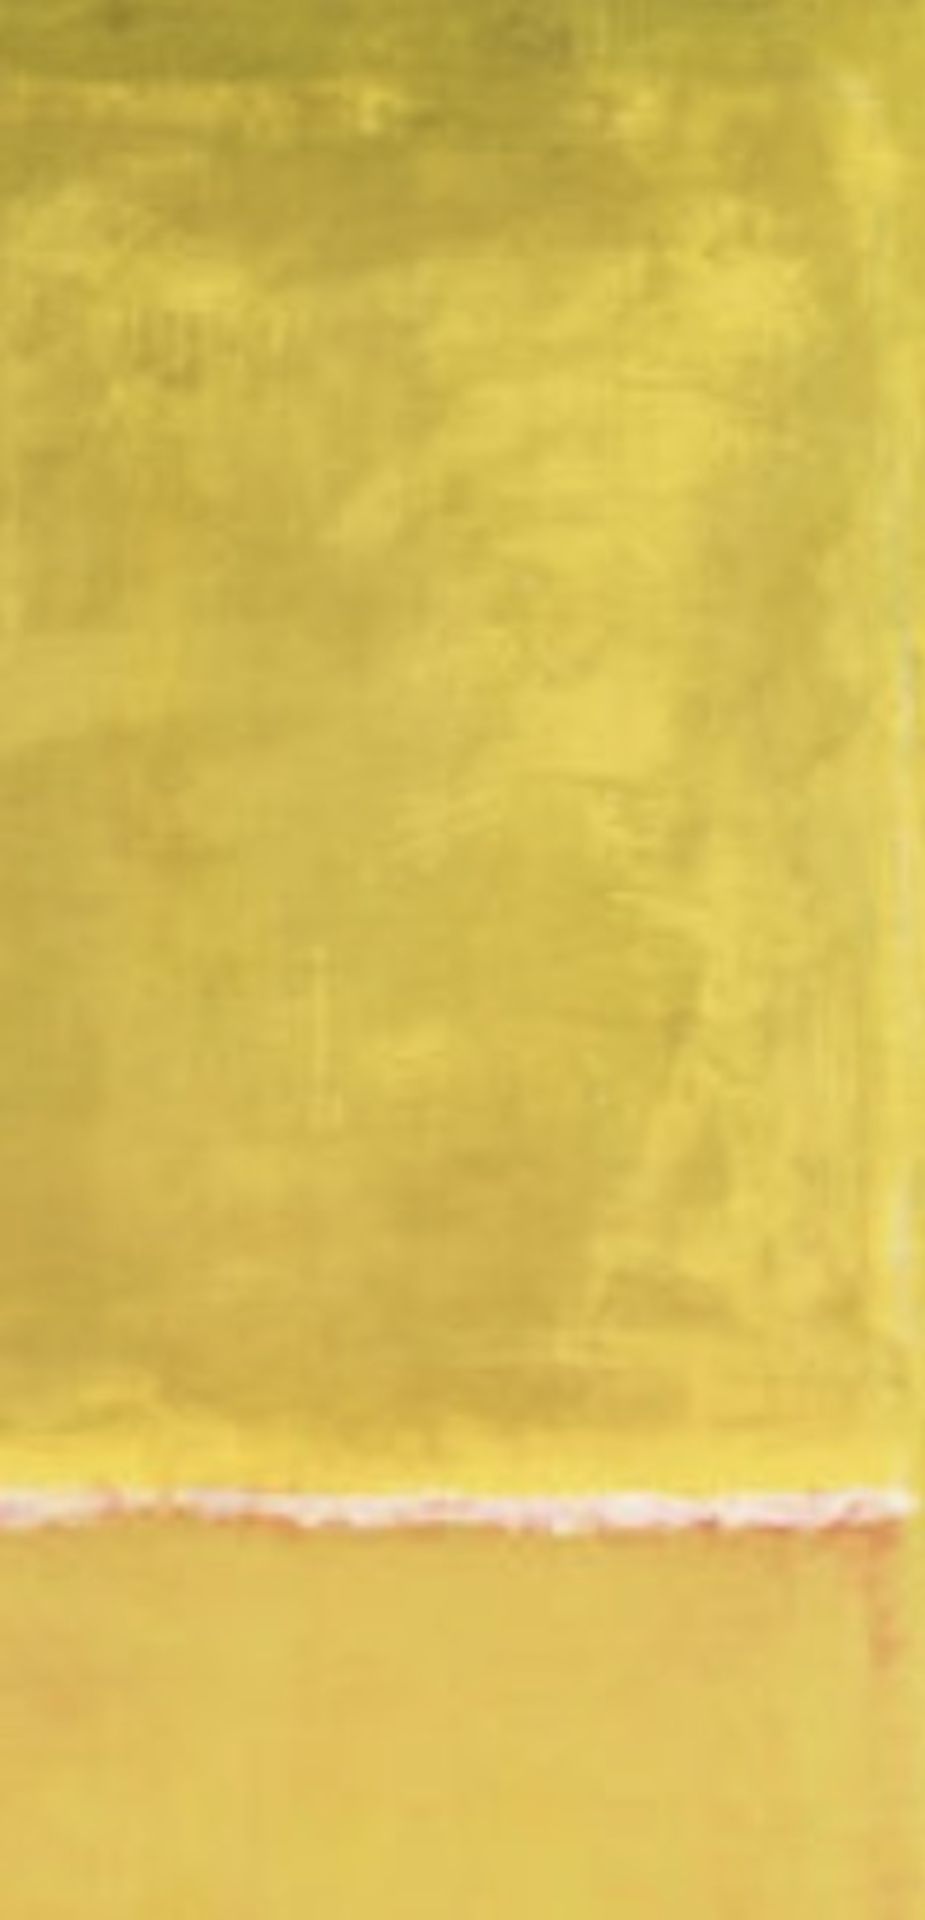 Mark Rothko "Yellow" Offset Lithograph - Image 3 of 5